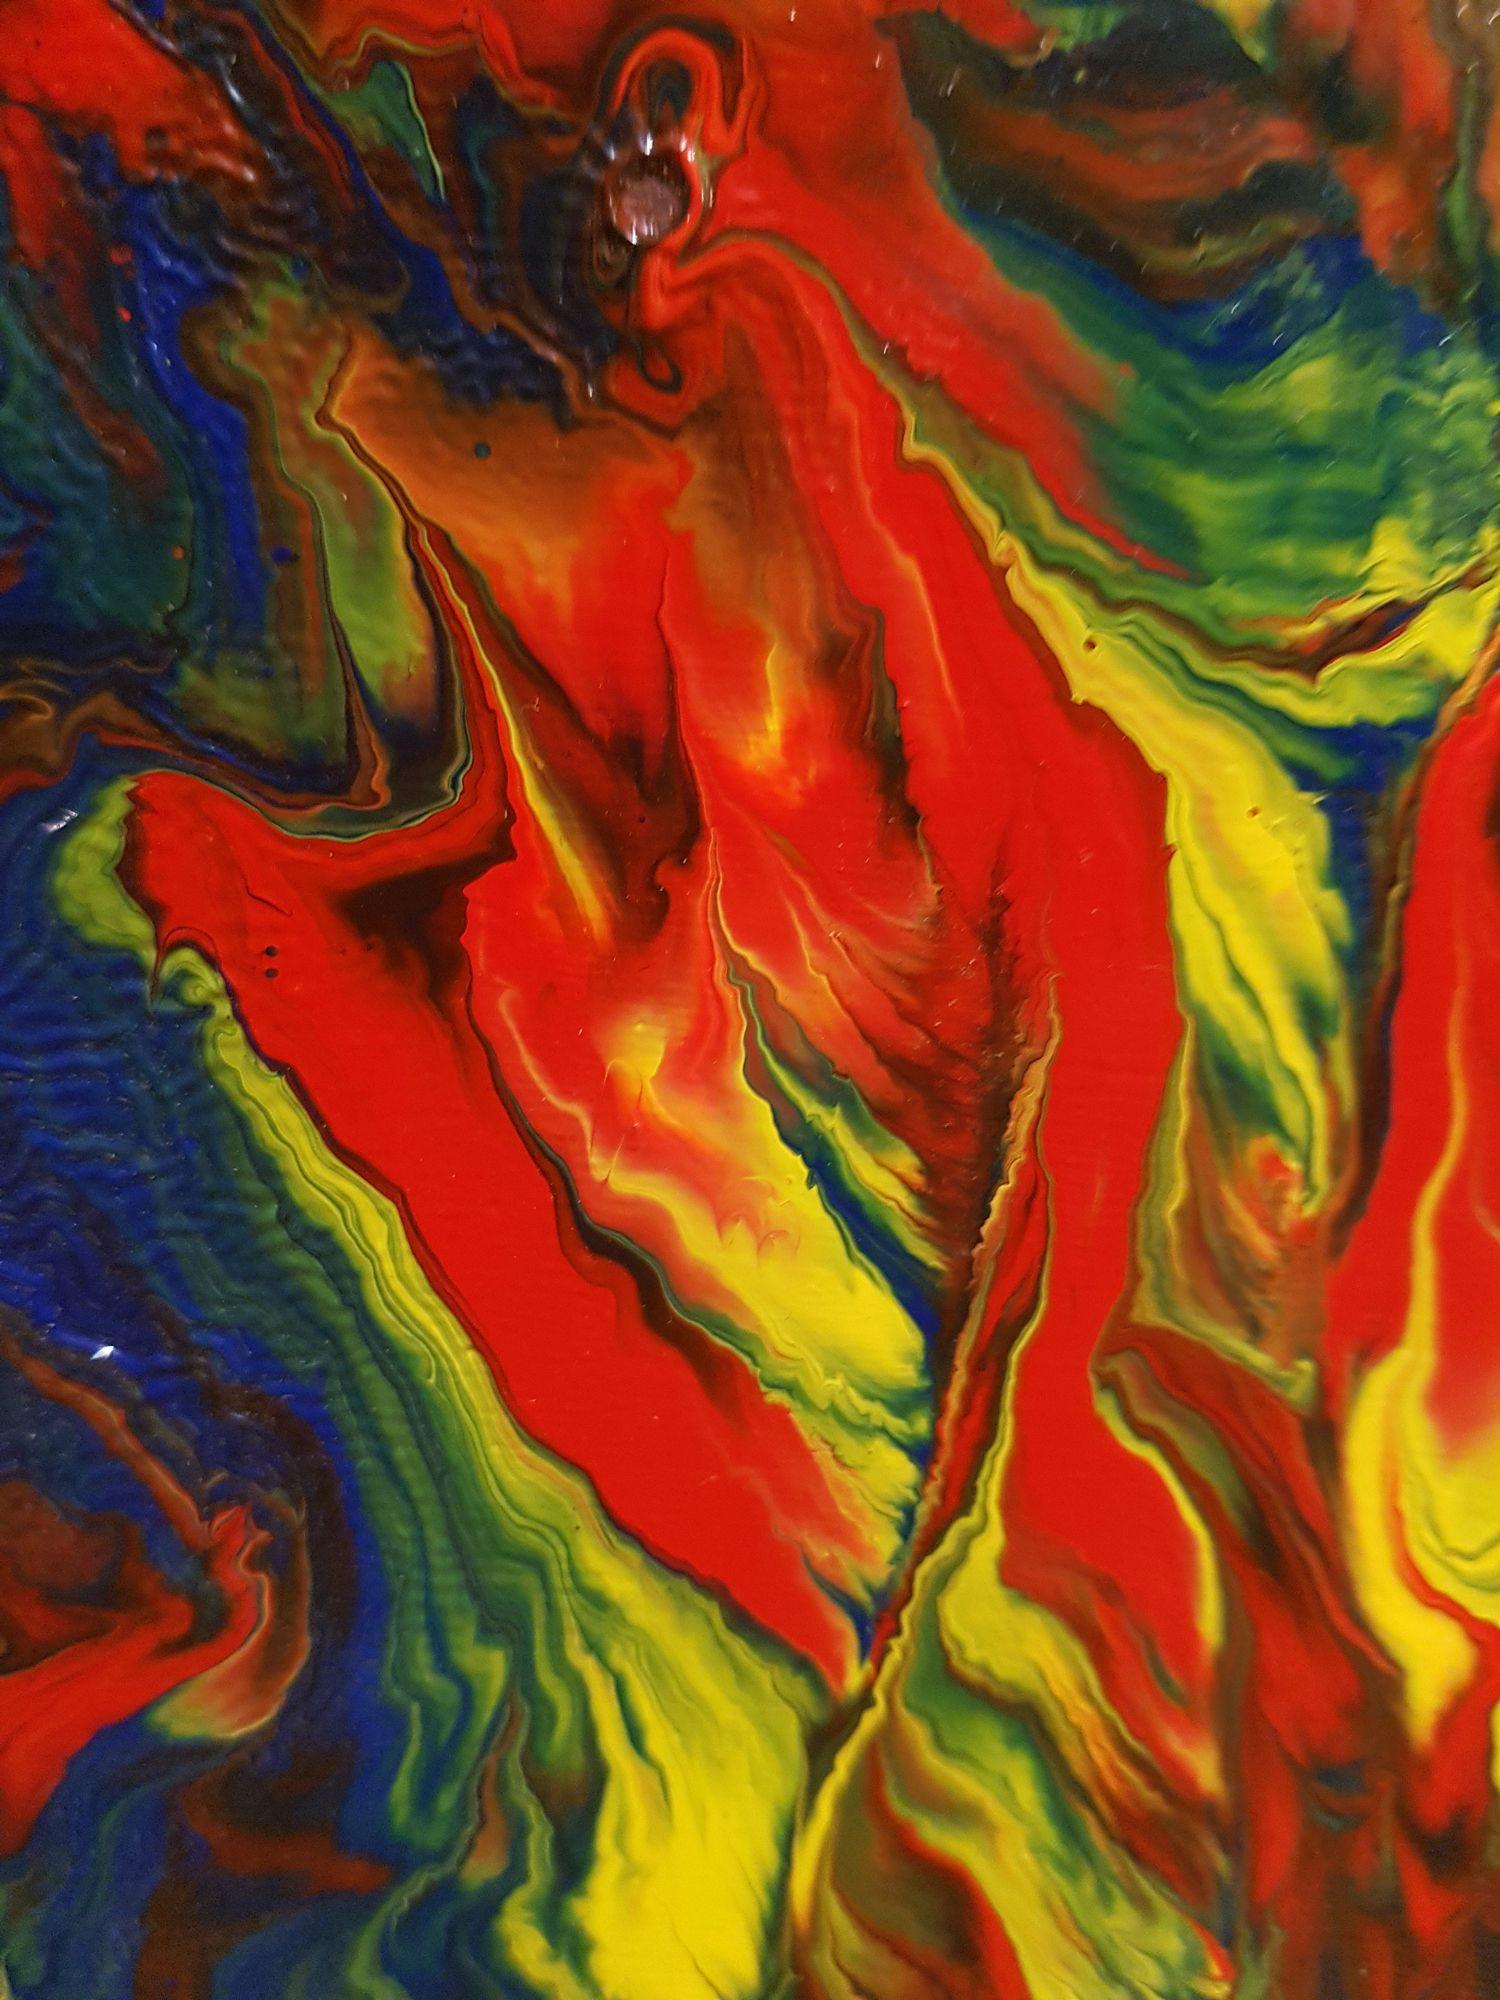 A vibrant abstract expressionist painting with a beautiful high gloss finish and unique textures, Primary Flames of Passion is a work of art that presents an emotion of passion. The painting falls into the 